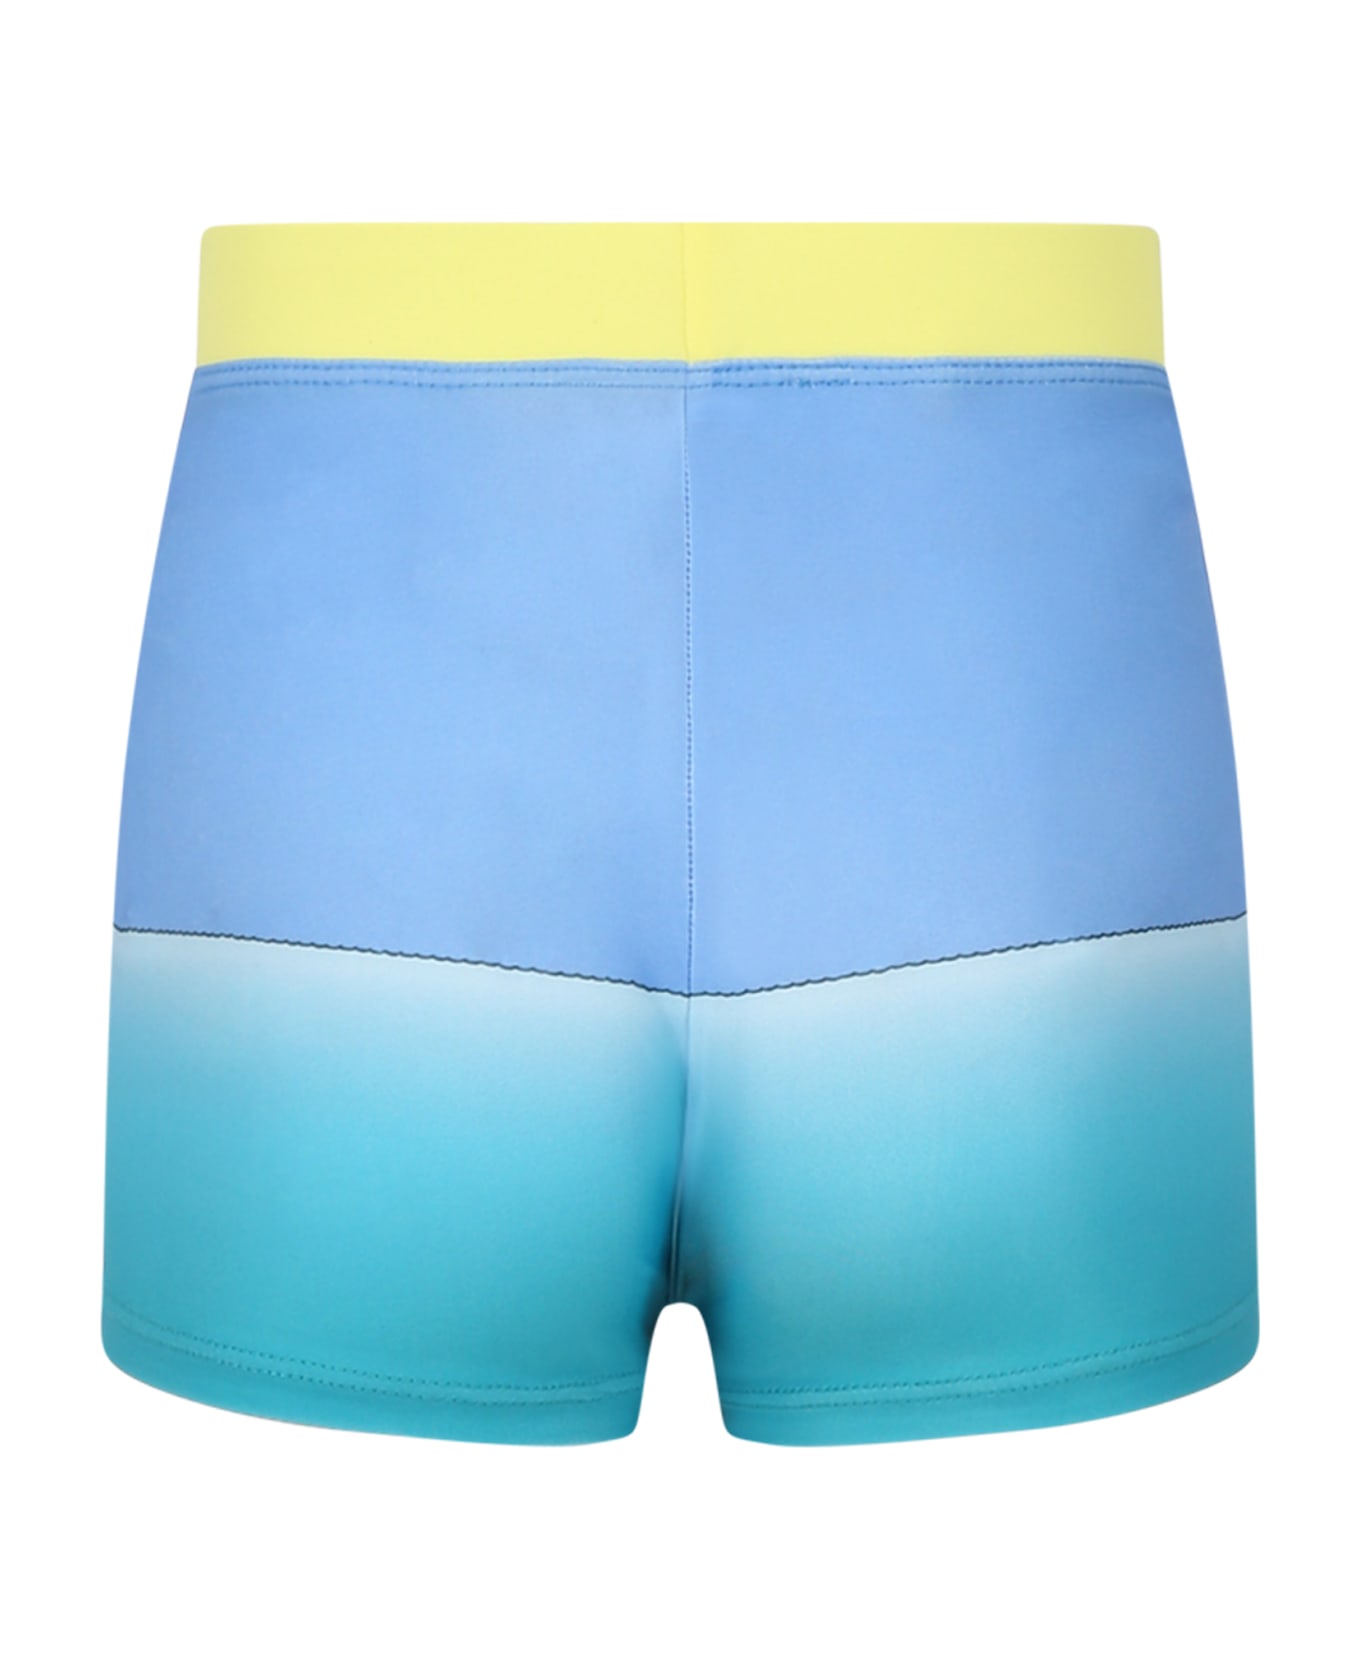 Marc Jacobs Light Blue Swim Boxer For Boy With Garfield And Logo - Multicolor